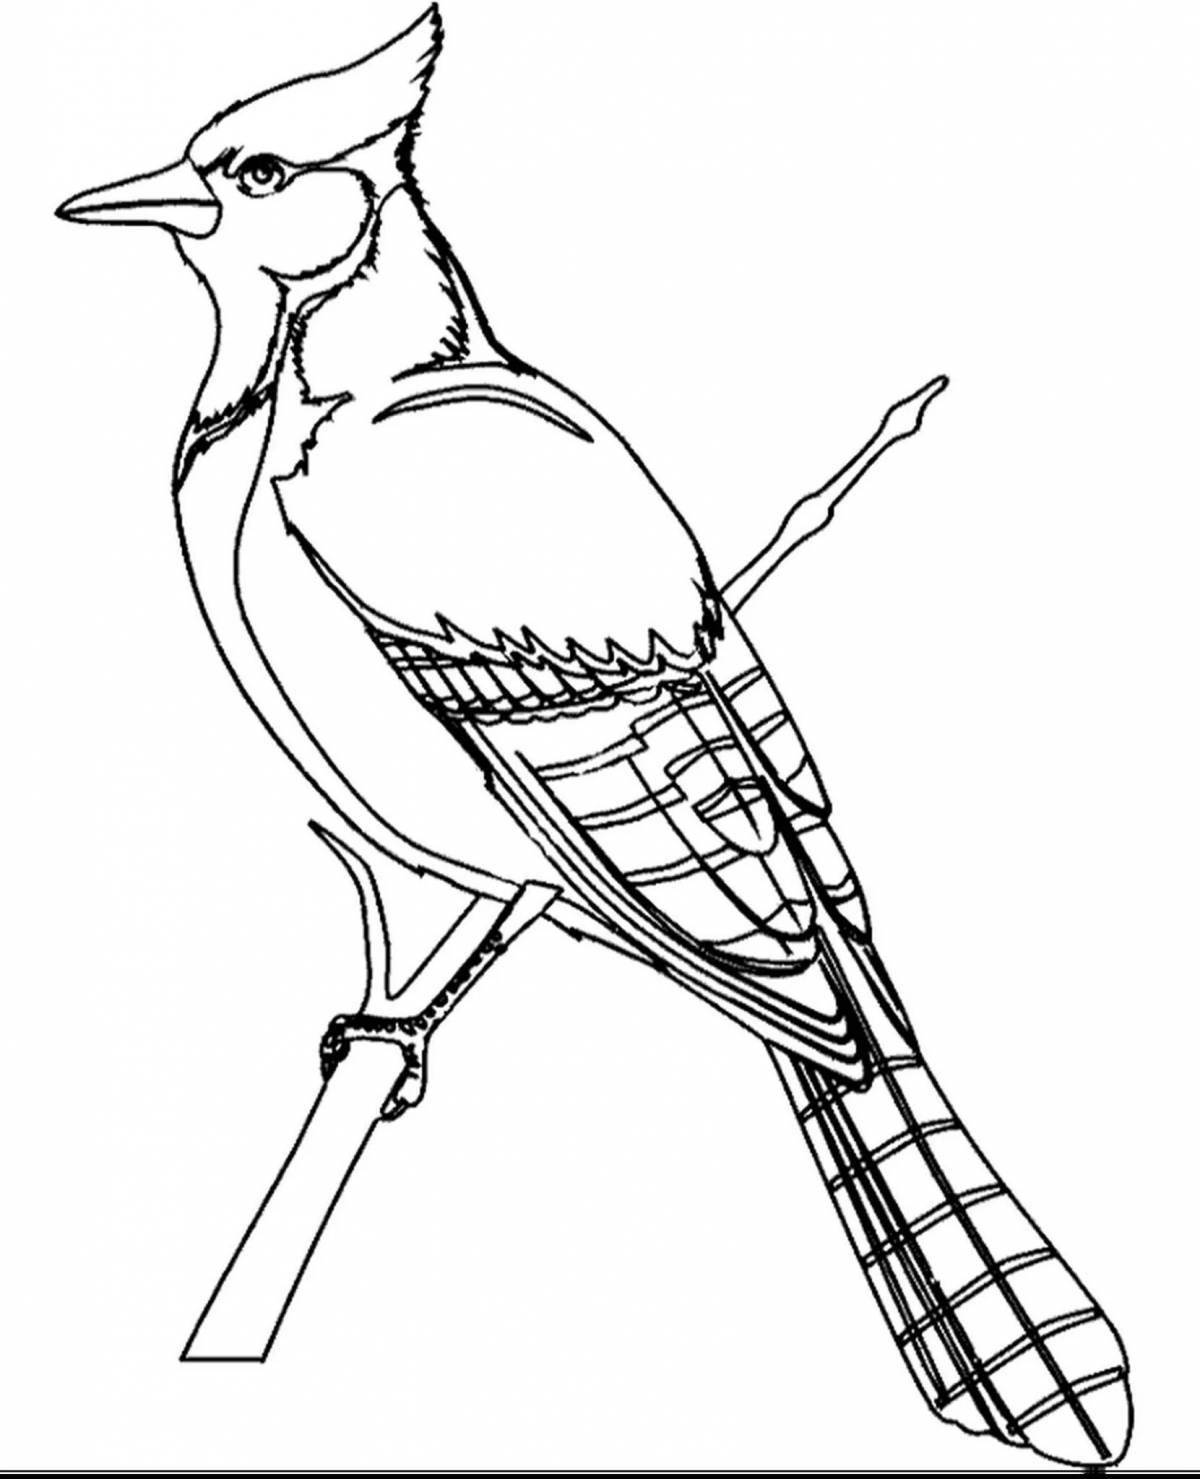 Amazing waxwing bird coloring page